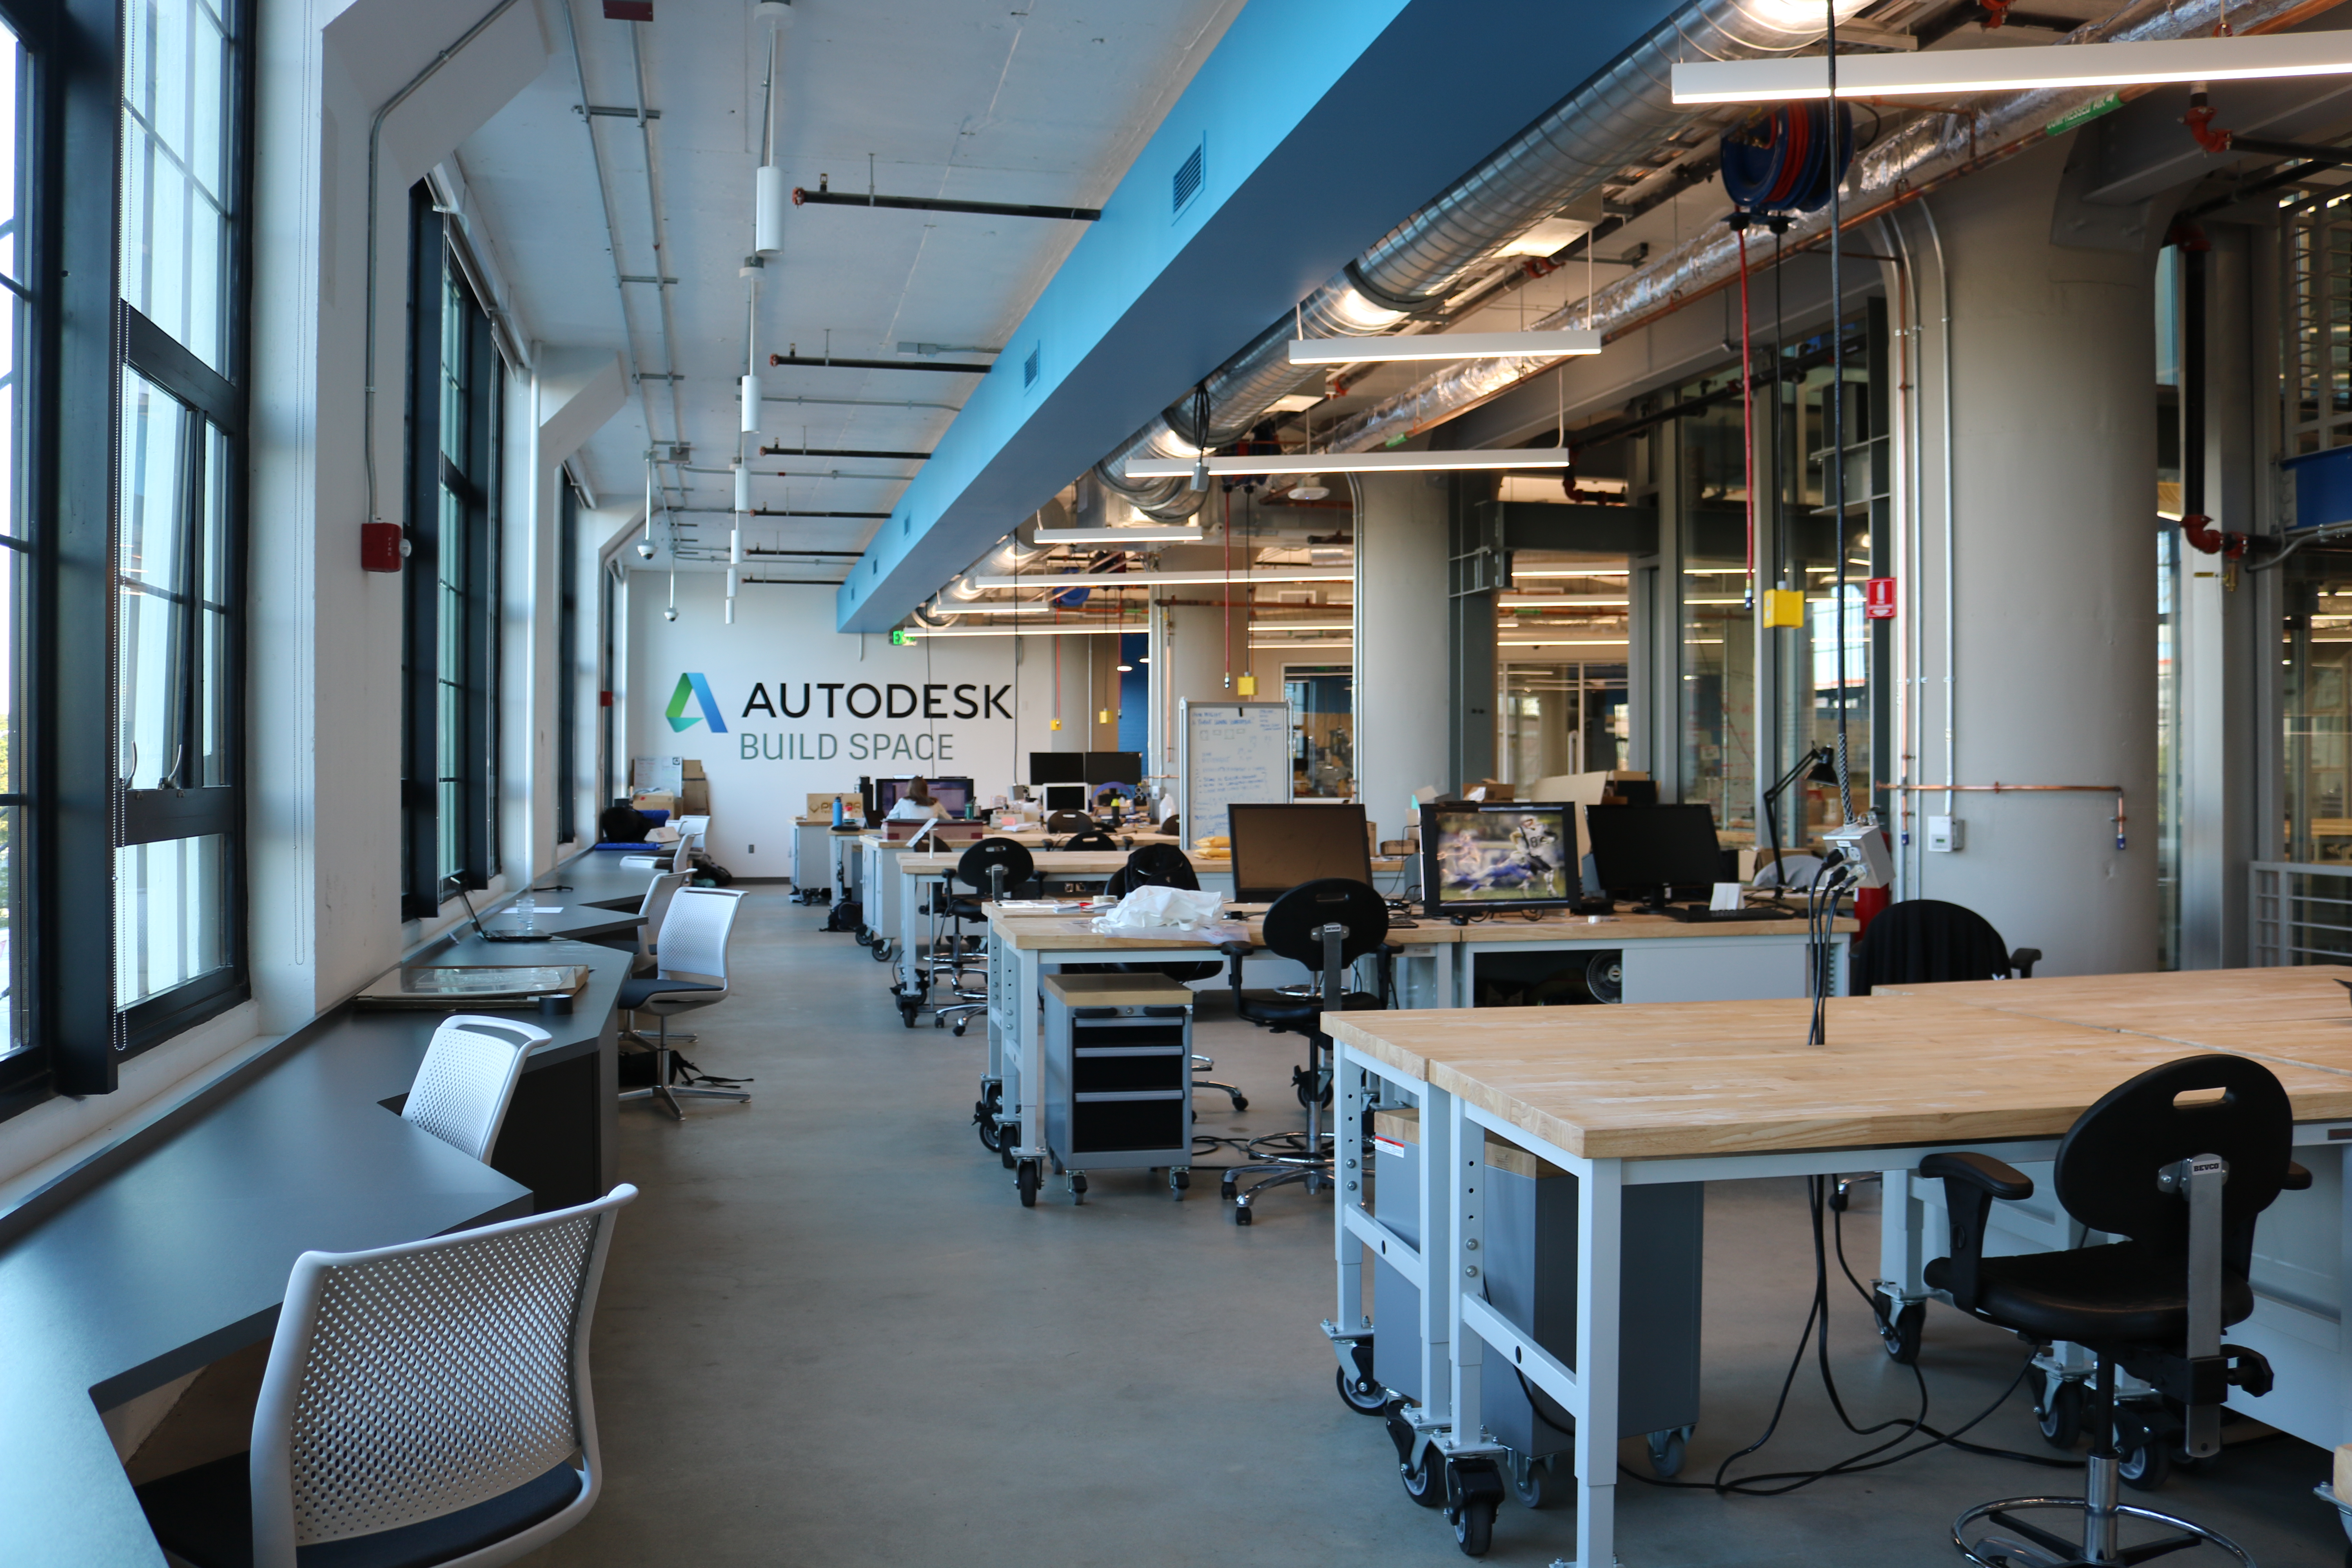 Autodesk Opens New BUILD Space for the Future of Making - In the Fold